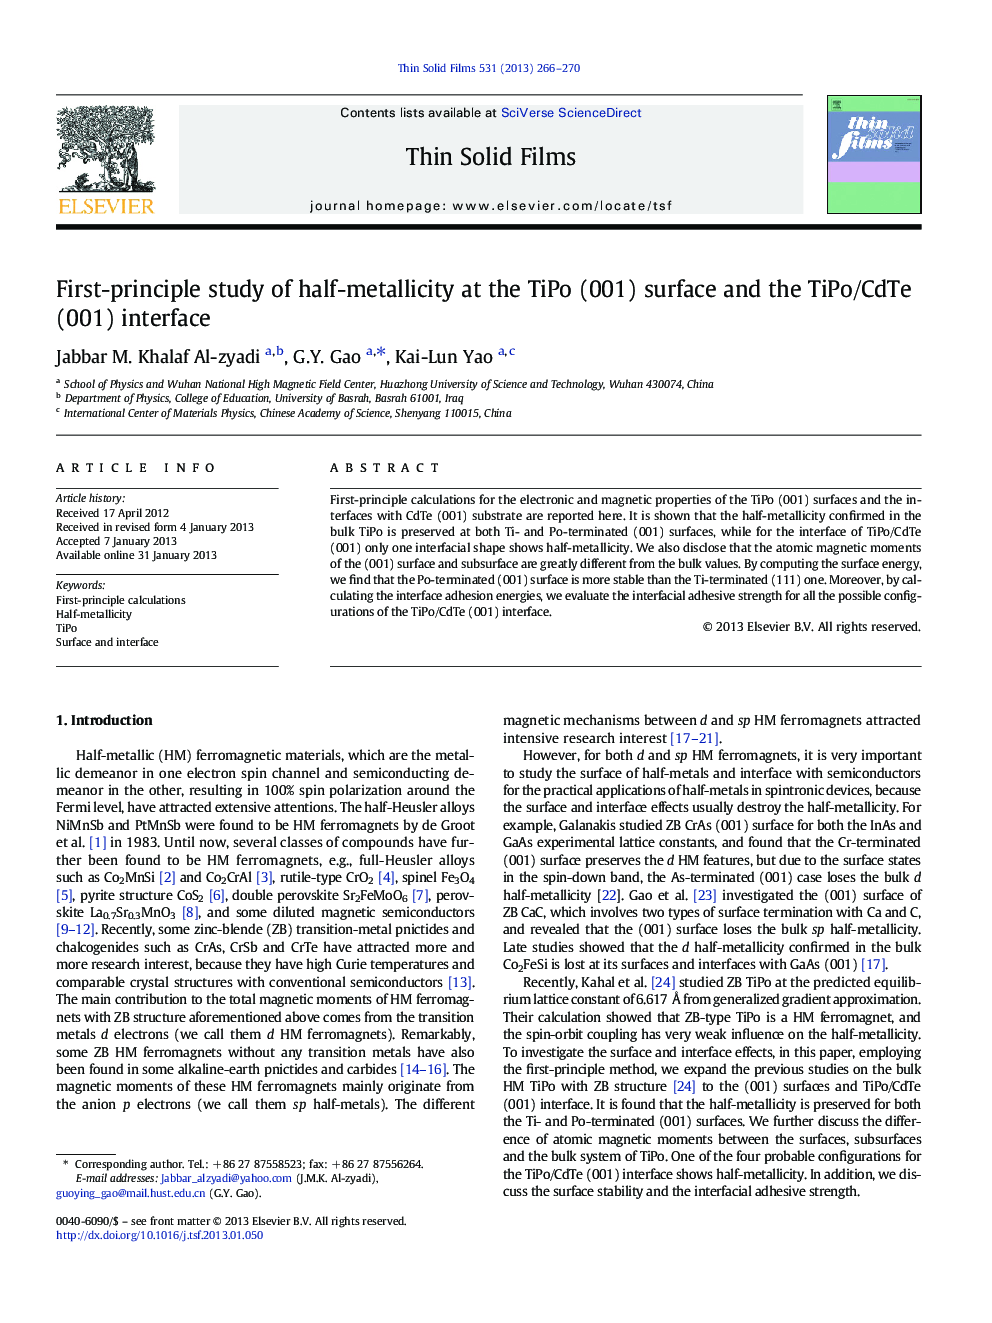 First-principle study of half-metallicity at the TiPo (001) surface and the TiPo/CdTe (001) interface